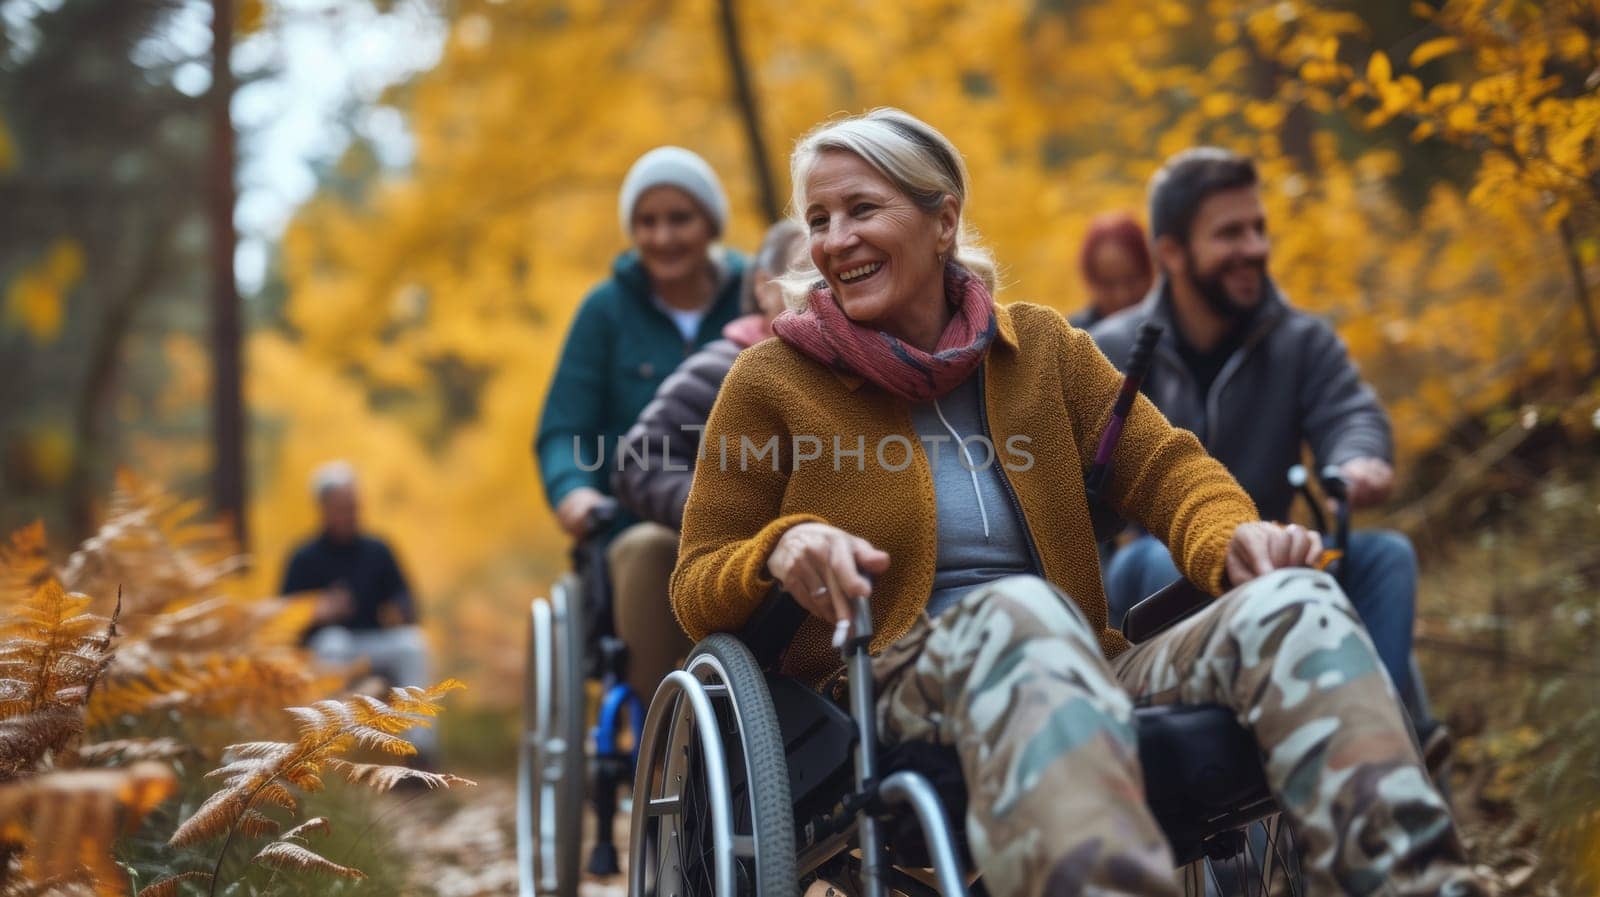 A group of people in wheelchairs on a trail through the woods, AI by starush